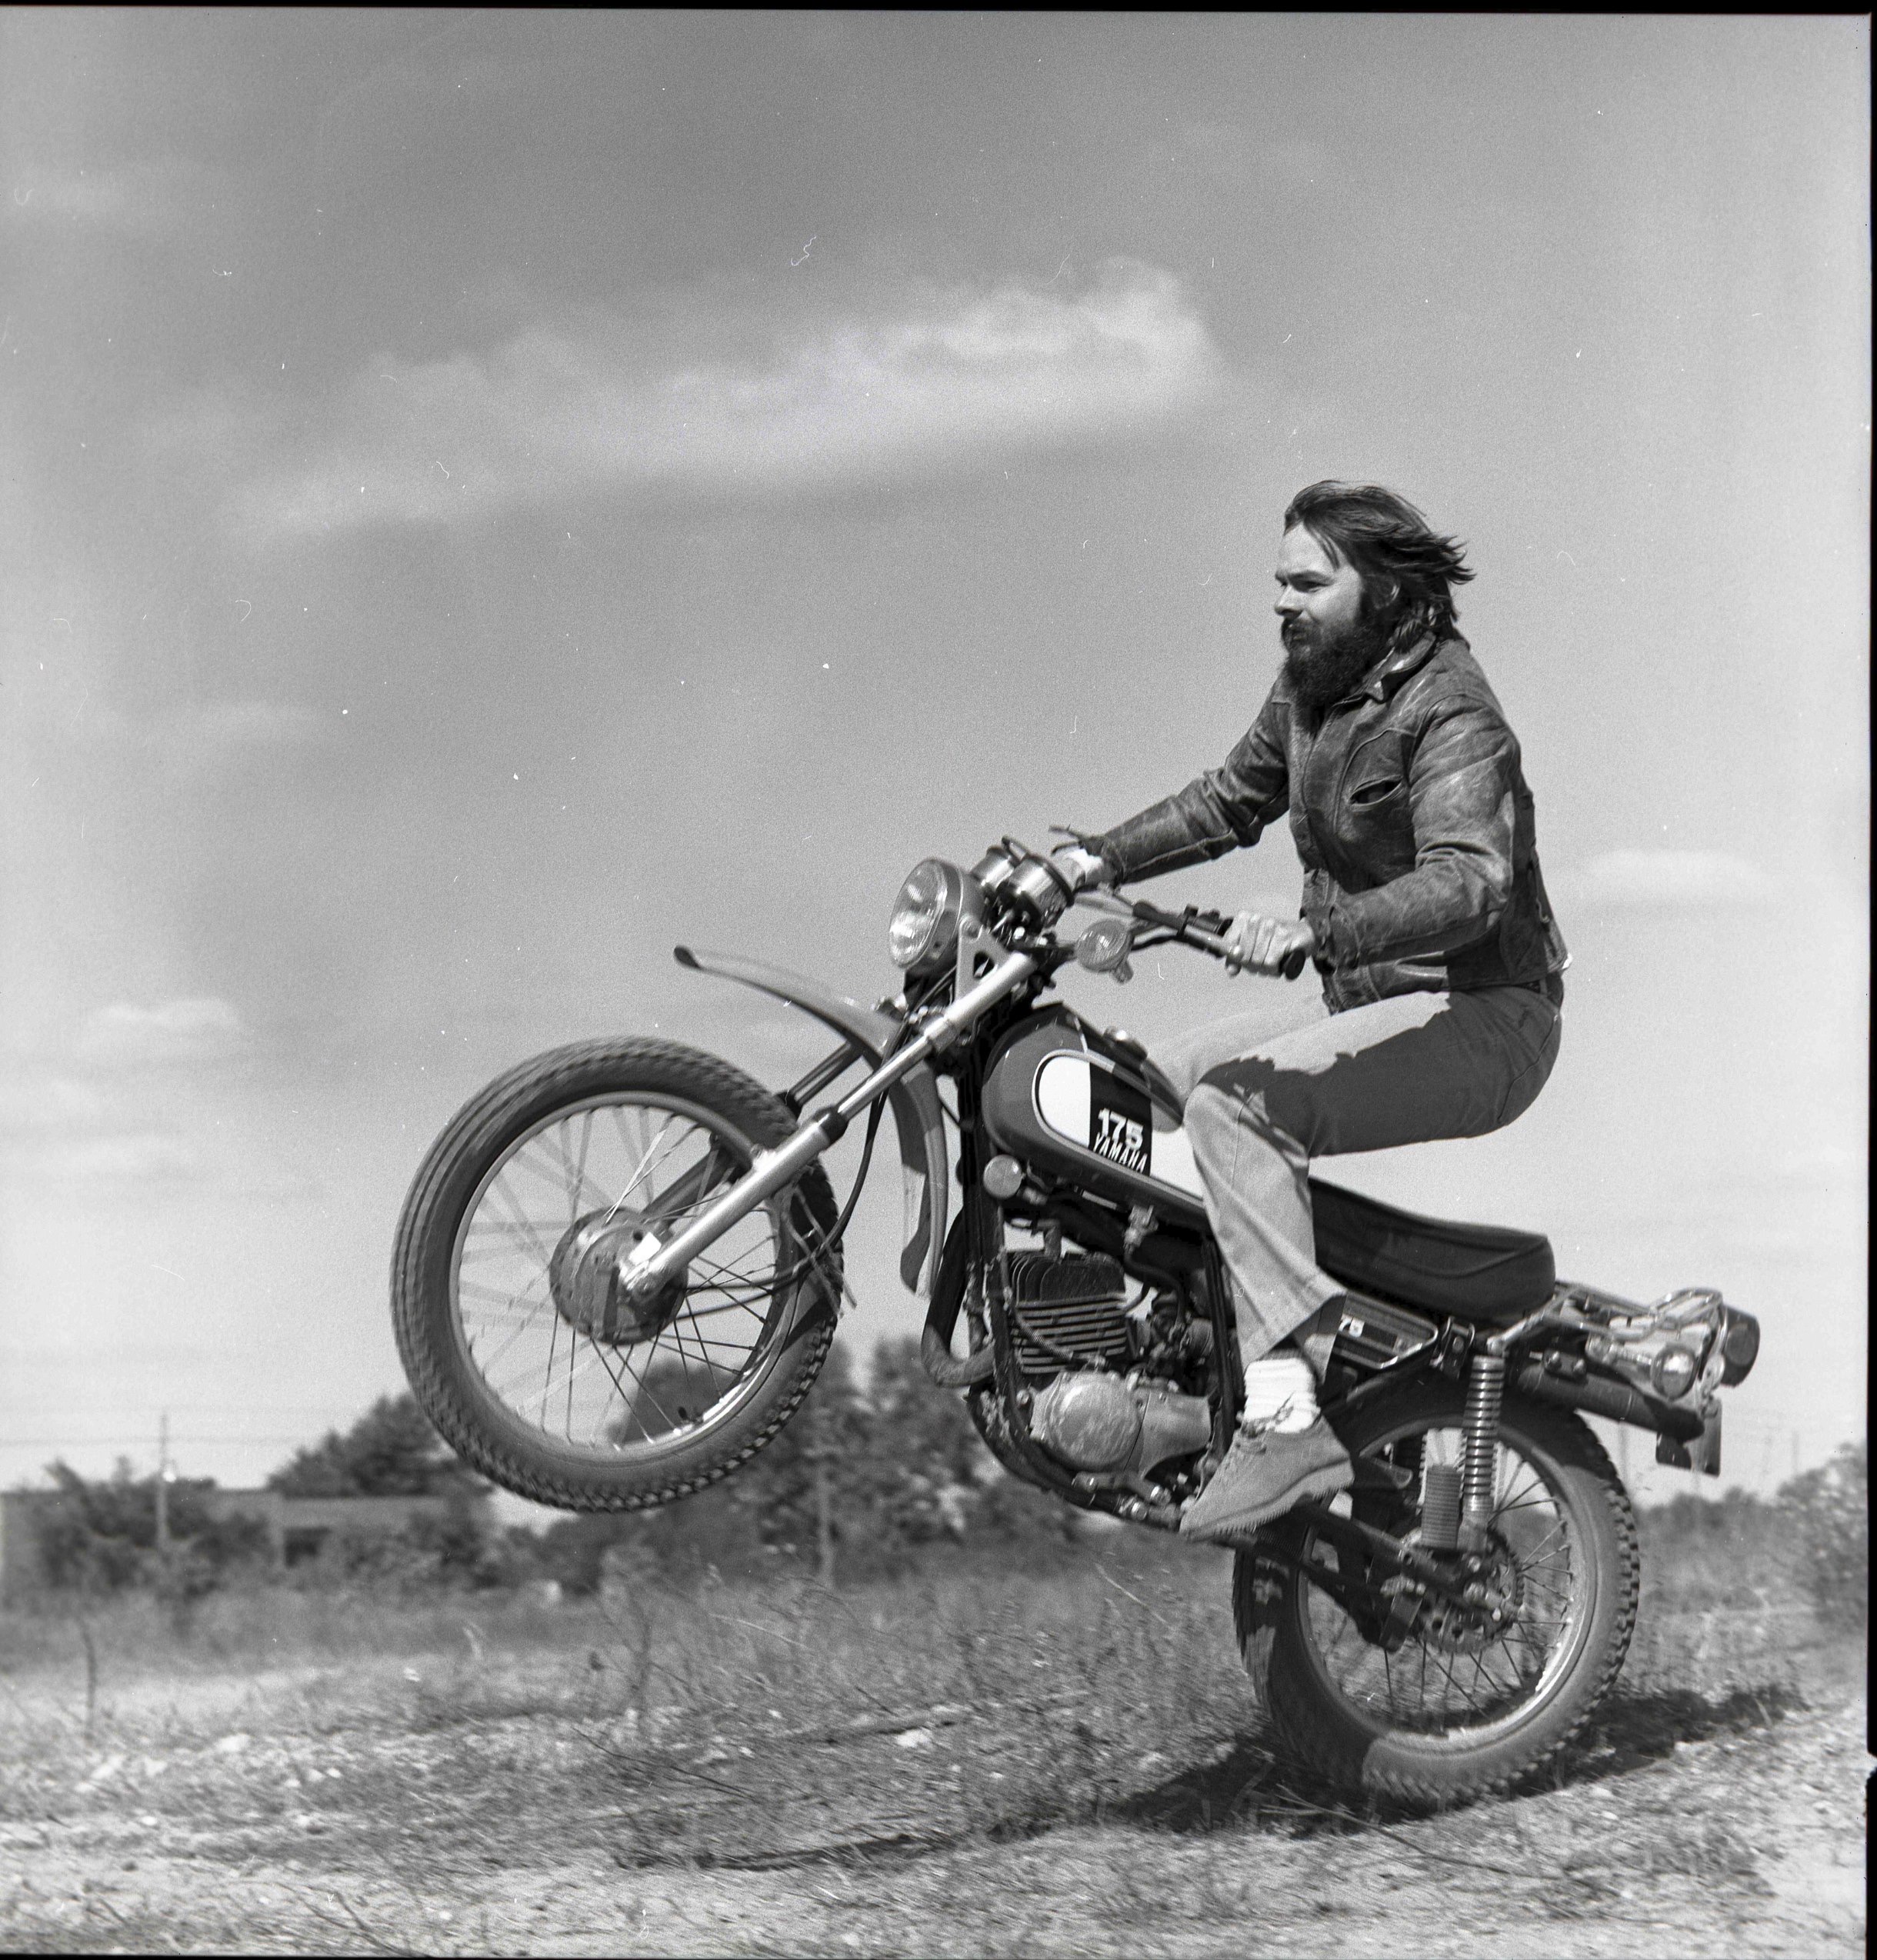 Rich Gootee of Good Seed Band riding a motorcycle in the 1970s